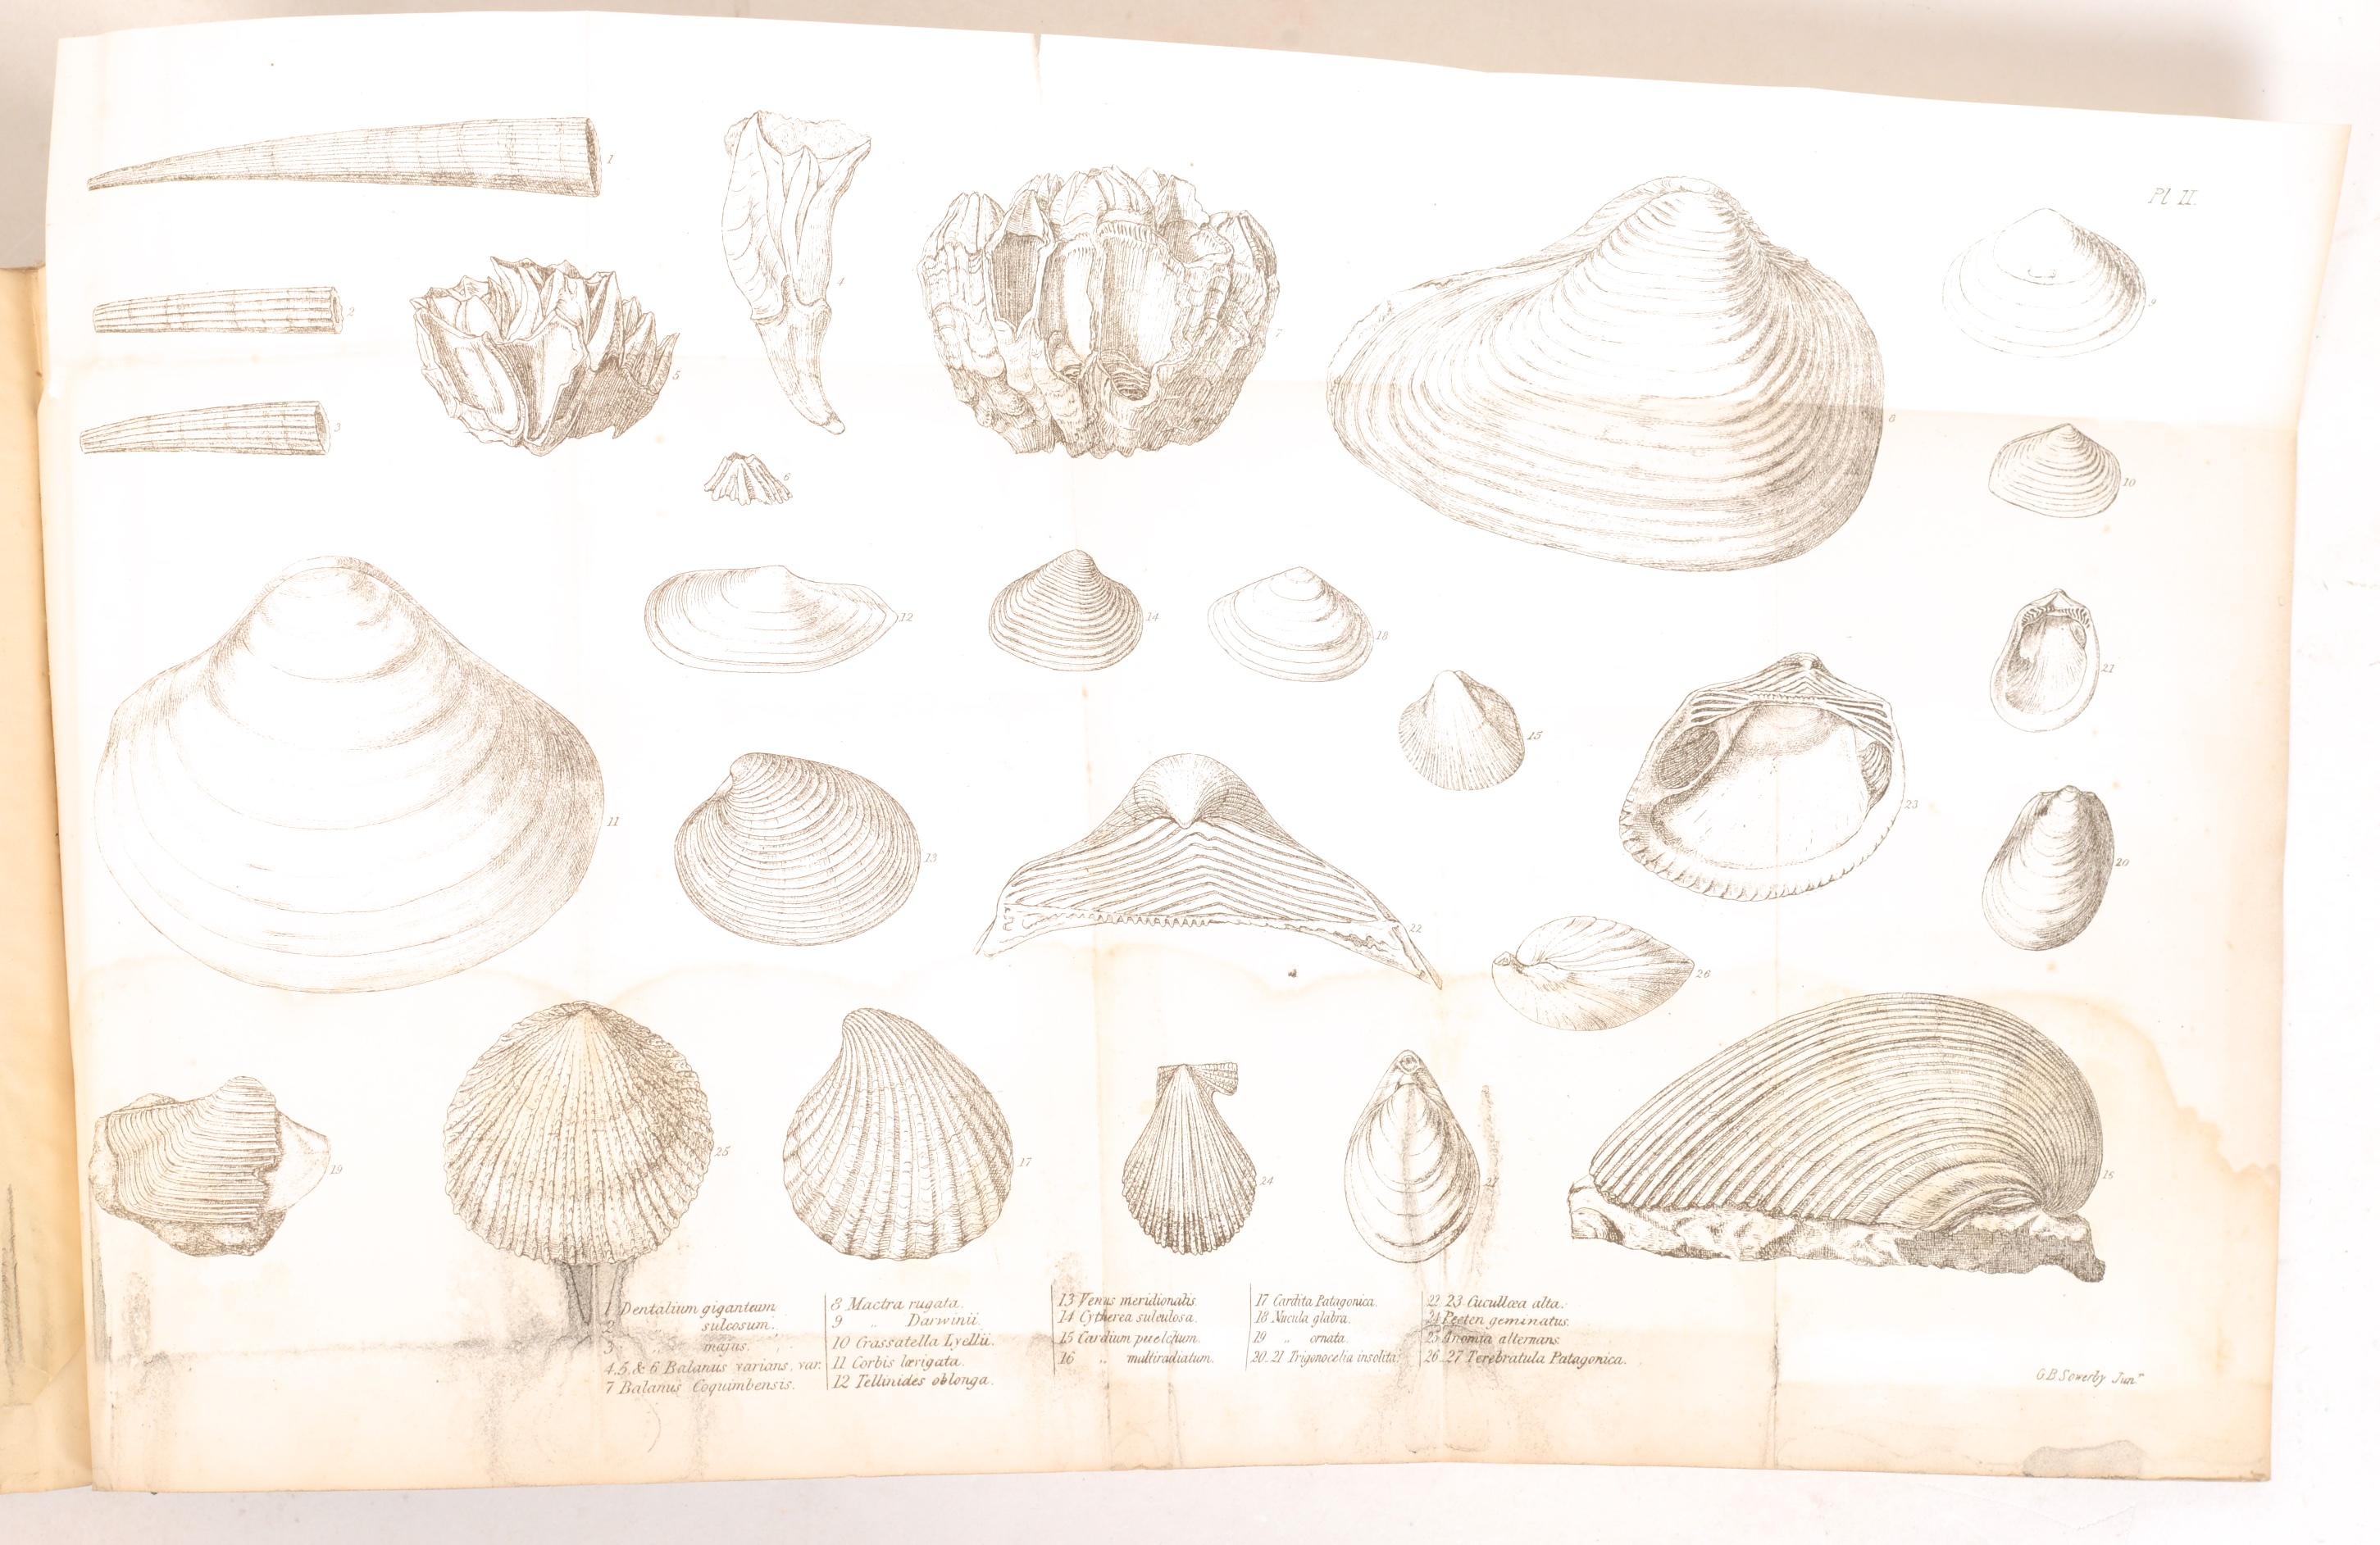 Paper Charles Darwin, Geological Observations on the Volcanic Islands, circa 1891